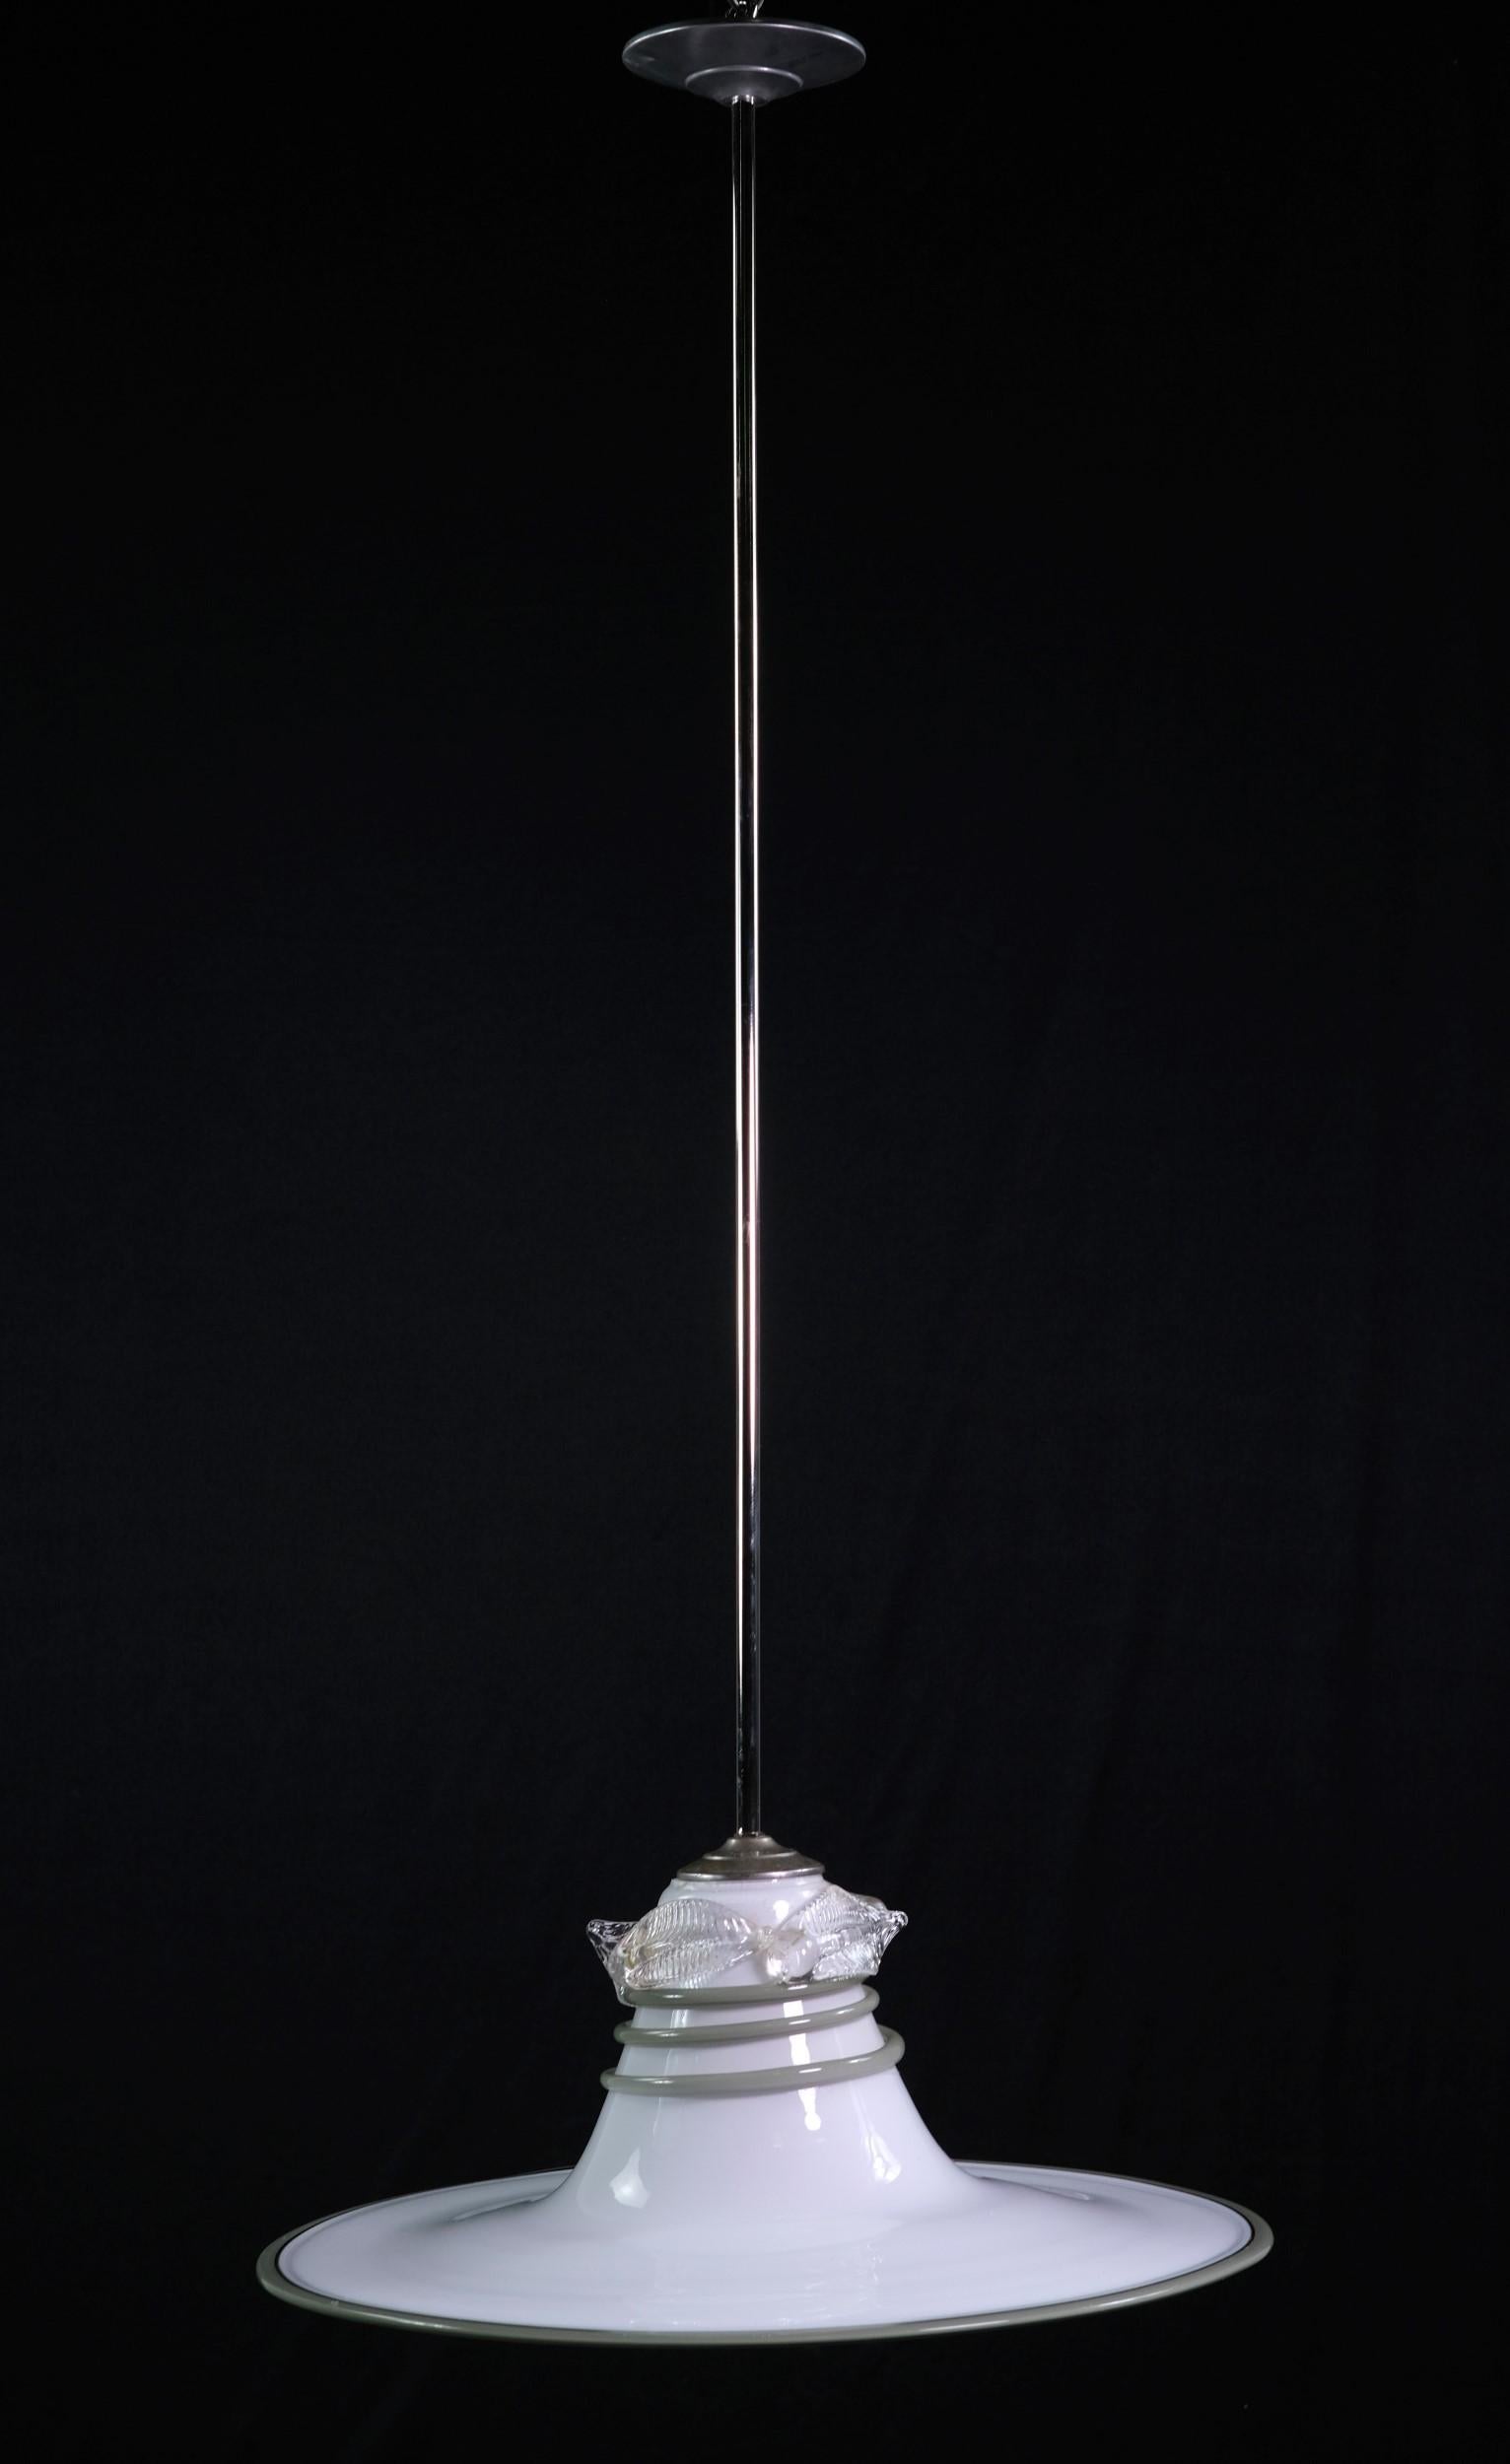 1980s Italian multicolor white, gray, and clear Vetri Murano glass pendant light with coil and leaf detail. Murano shade is hand made and hand worked. New nickel plated pole and canopy hardware. This can be seen at our 400 Gilligan St location in